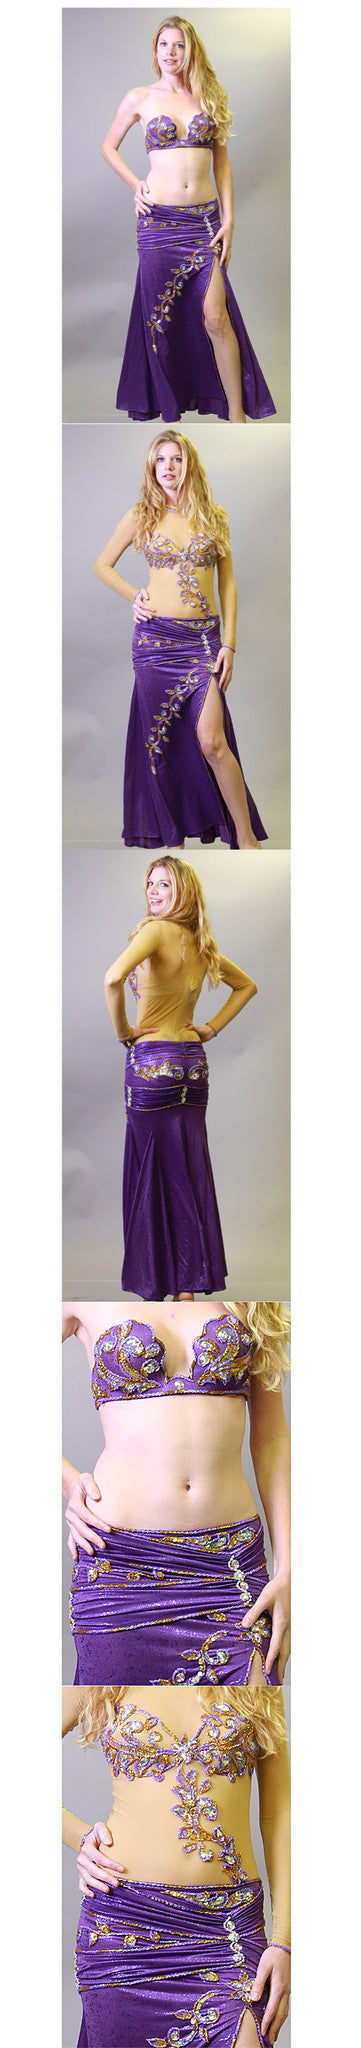 Venus Collection Two-Piece Costume